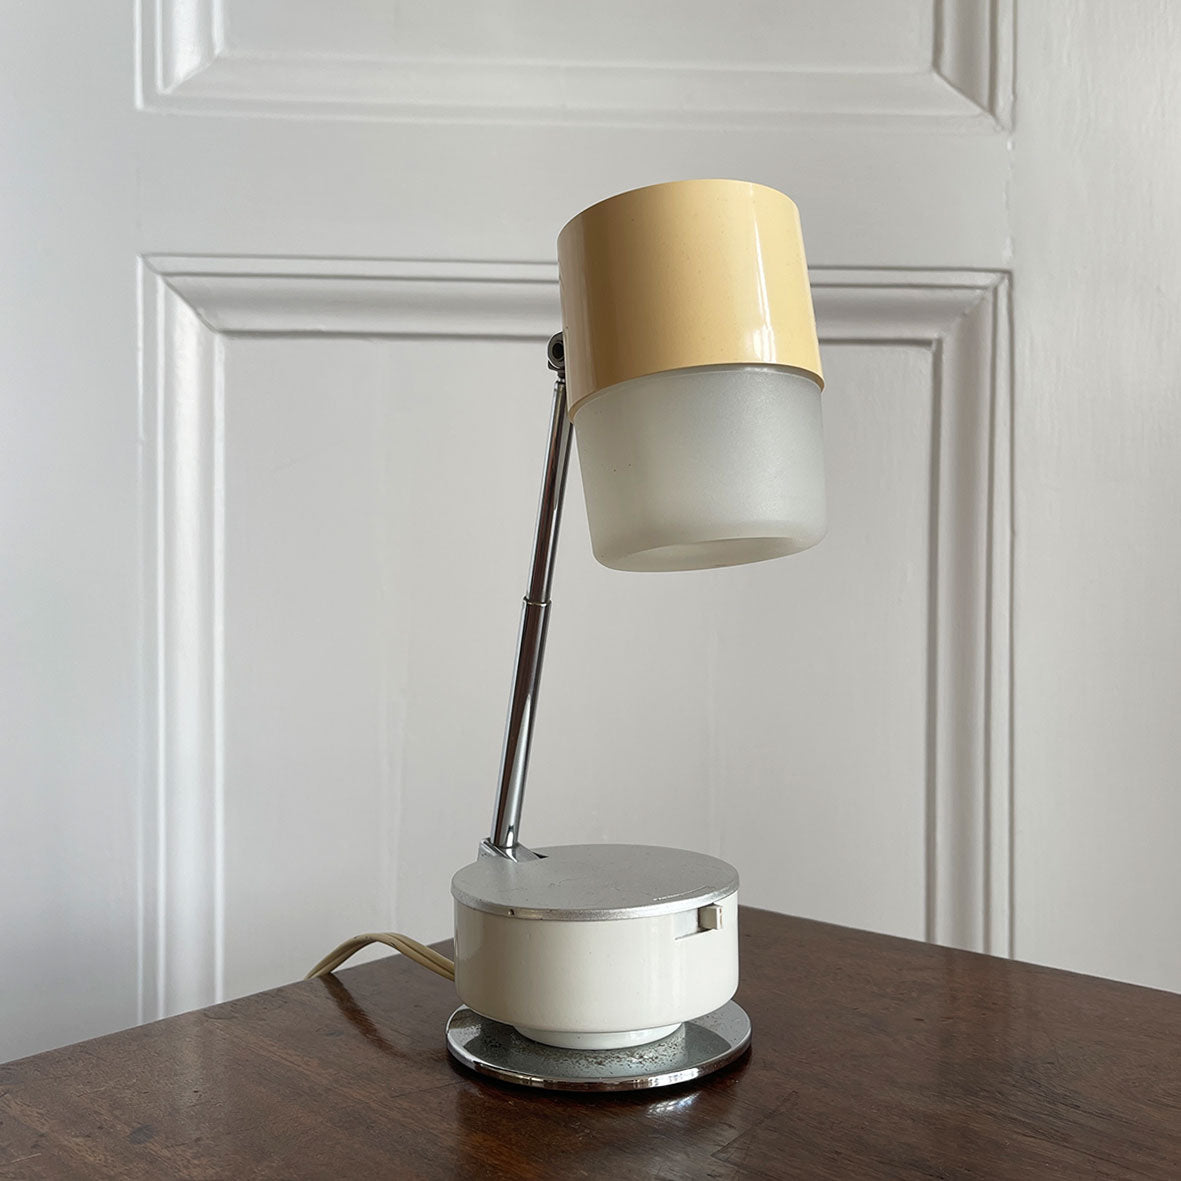 A slick looking 1960s Japanese Lloyd's compact Telescopic Desk Lamp. A very versatile lamp that can be set in many positions. With two light intensities, it's Ideal for a cool desk or bedside table. Main On off switch on lead - SHOP NOW - www.intovintage.co.uk